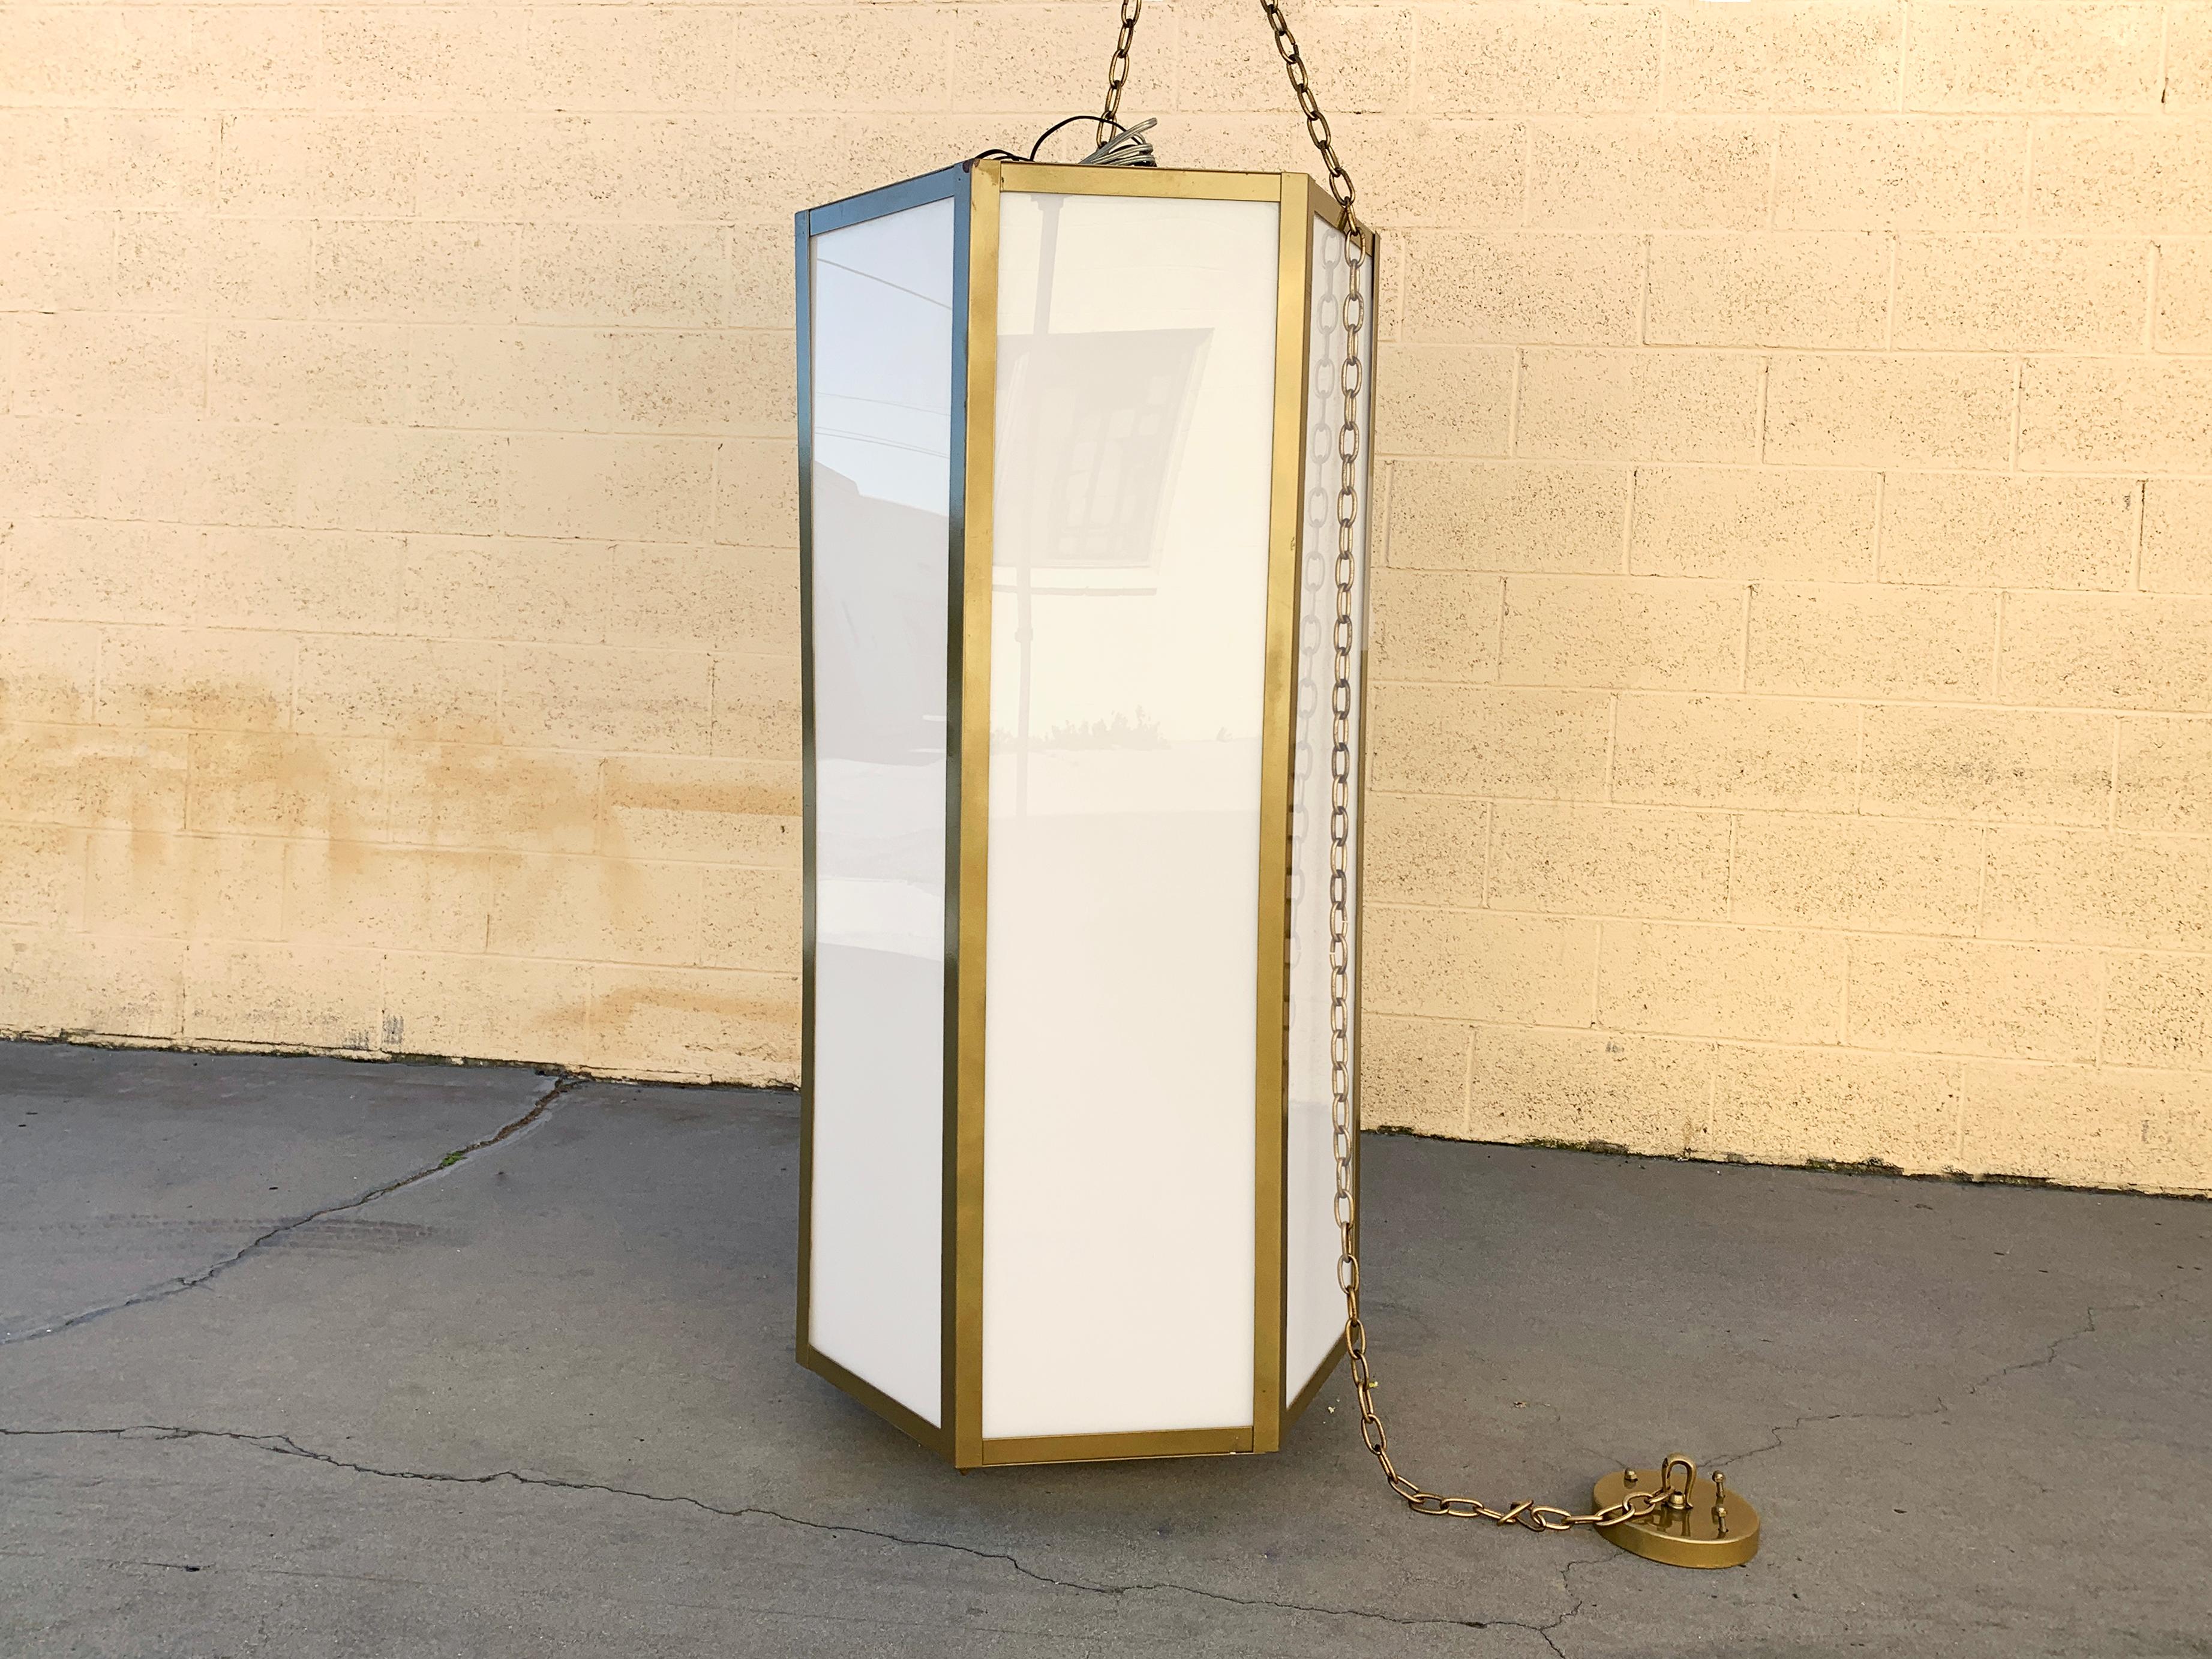 Large six-sided pendant light fixture made of a powder-coated gold steel frame with white plexi faces. Holds 12-lights. Fab modern geometric styling; probably newer made circa 2000. Vintage paint shows a little wear as pictured. Fully functional